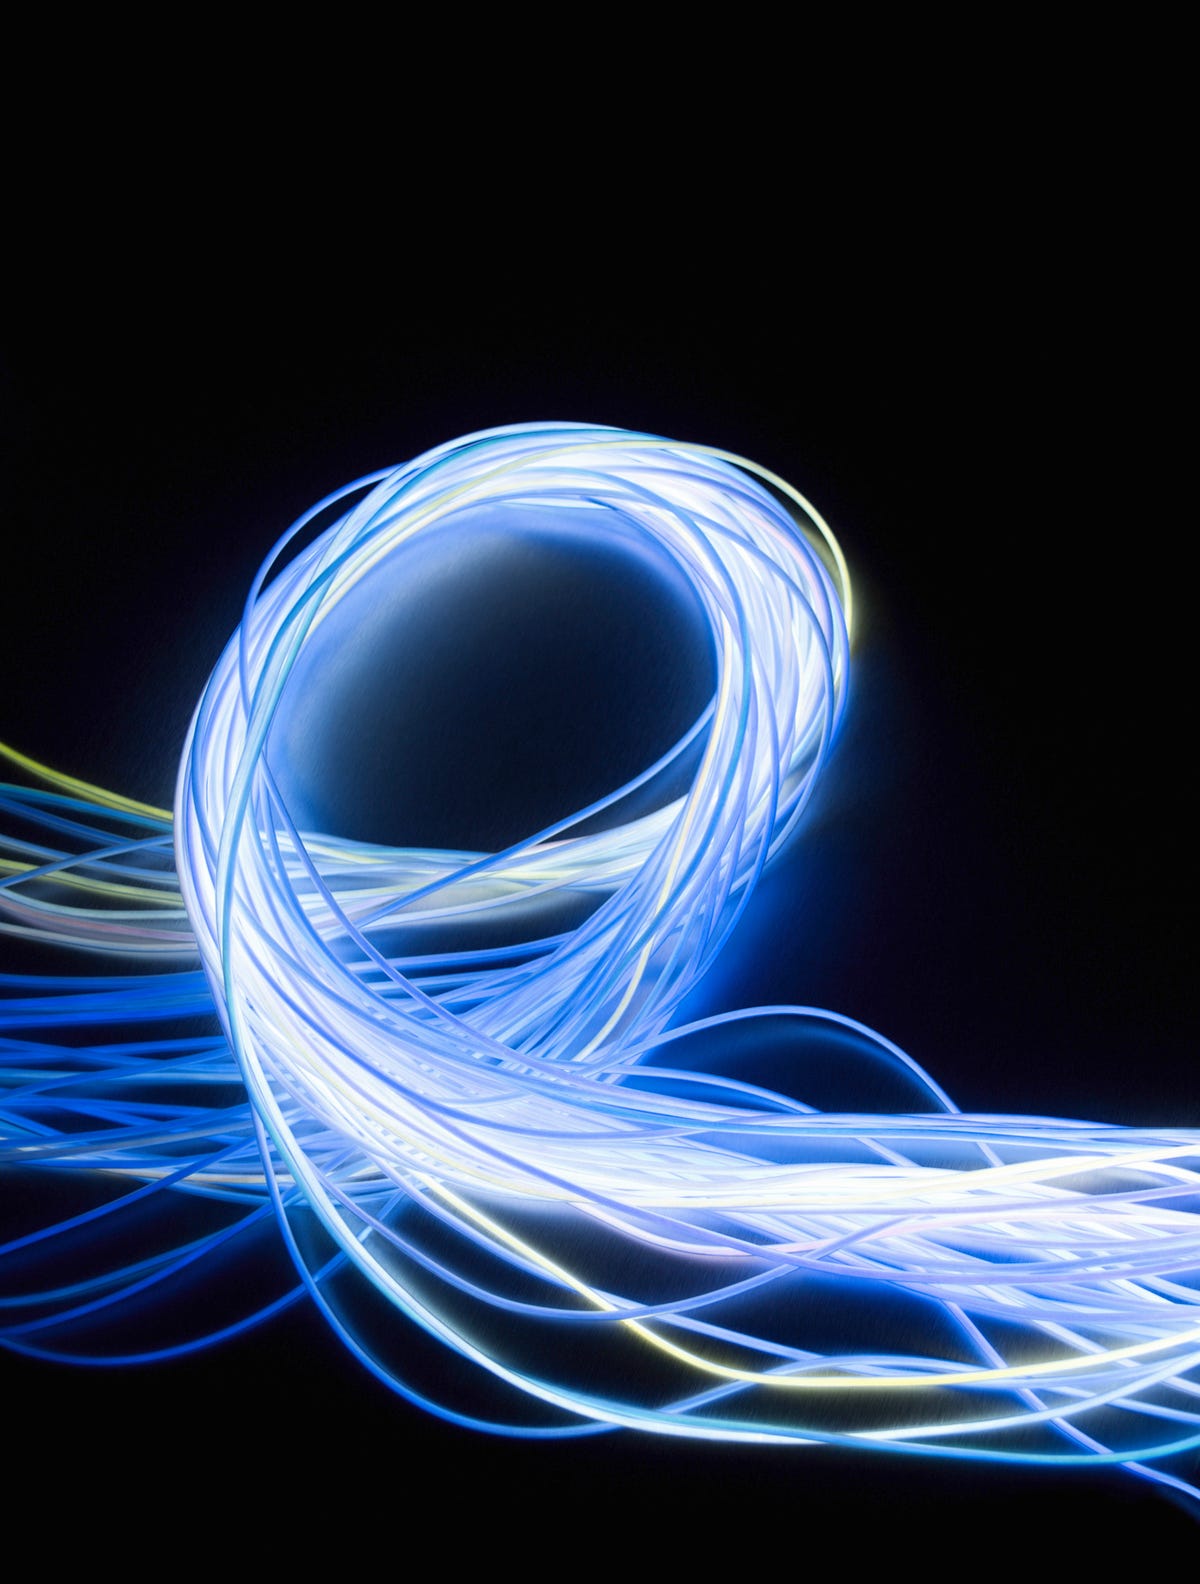 Looped bundles of fiber optic cables against a black background